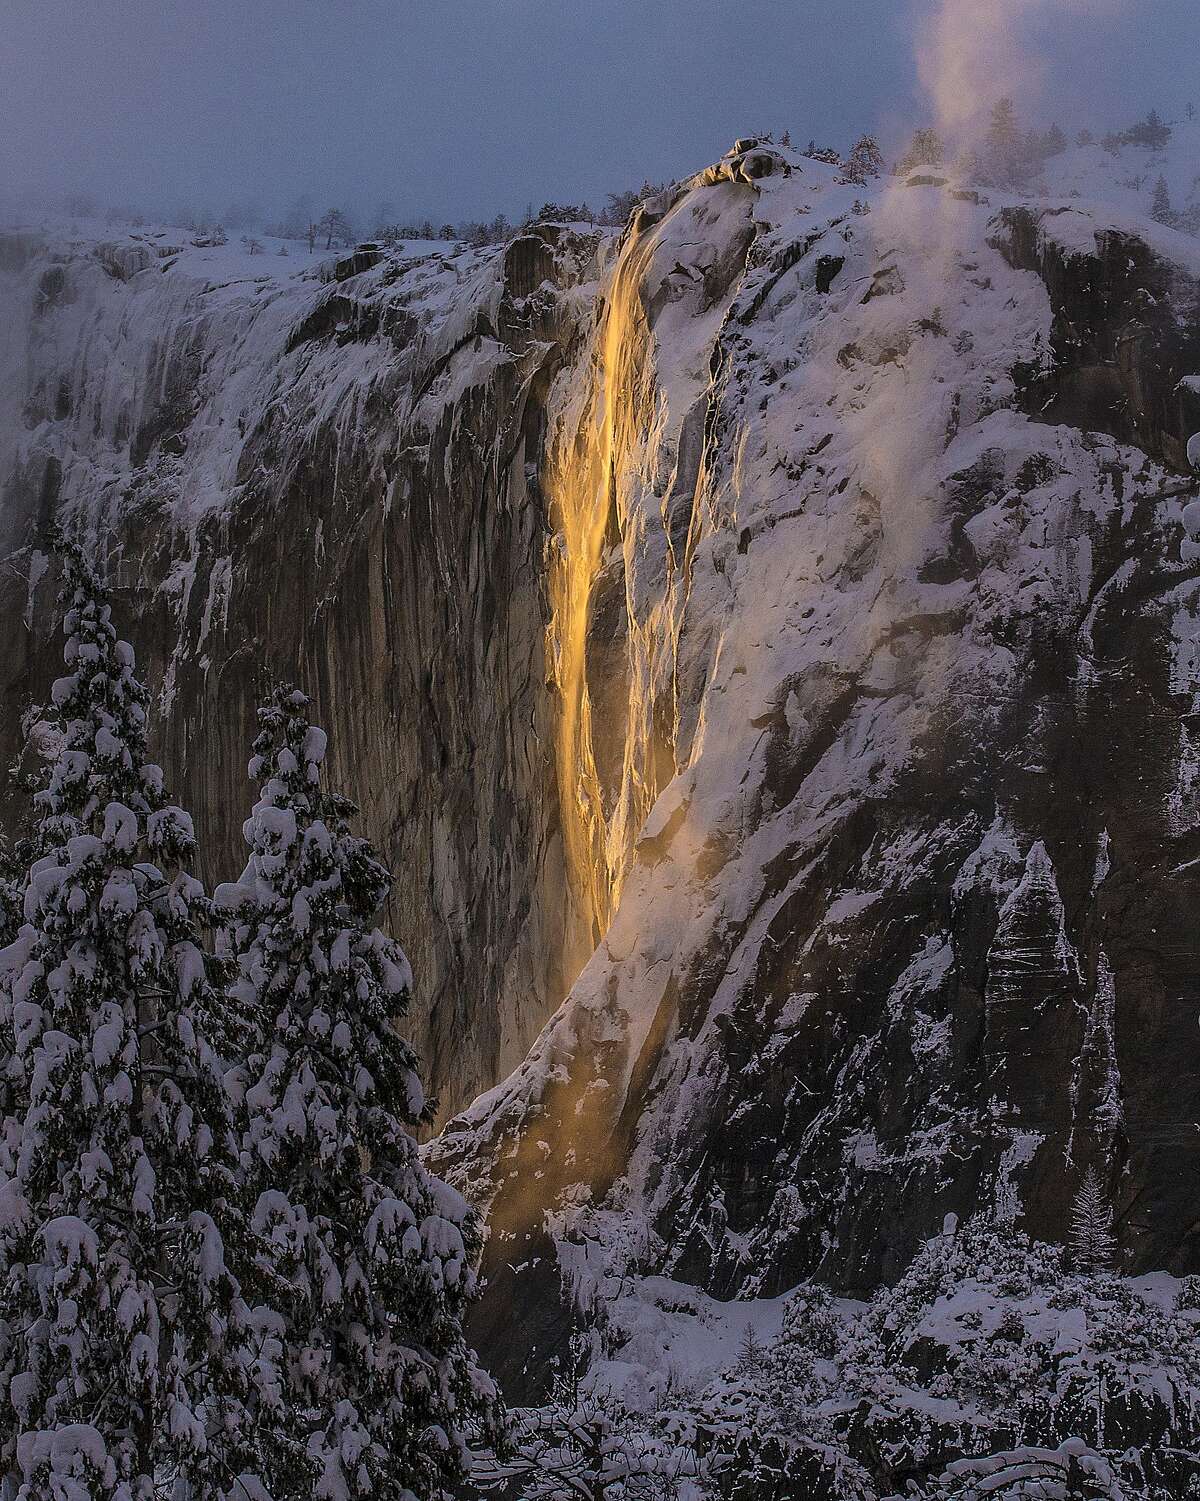 Yosemite just made it harder to photograph the Horsetail 'firefall'